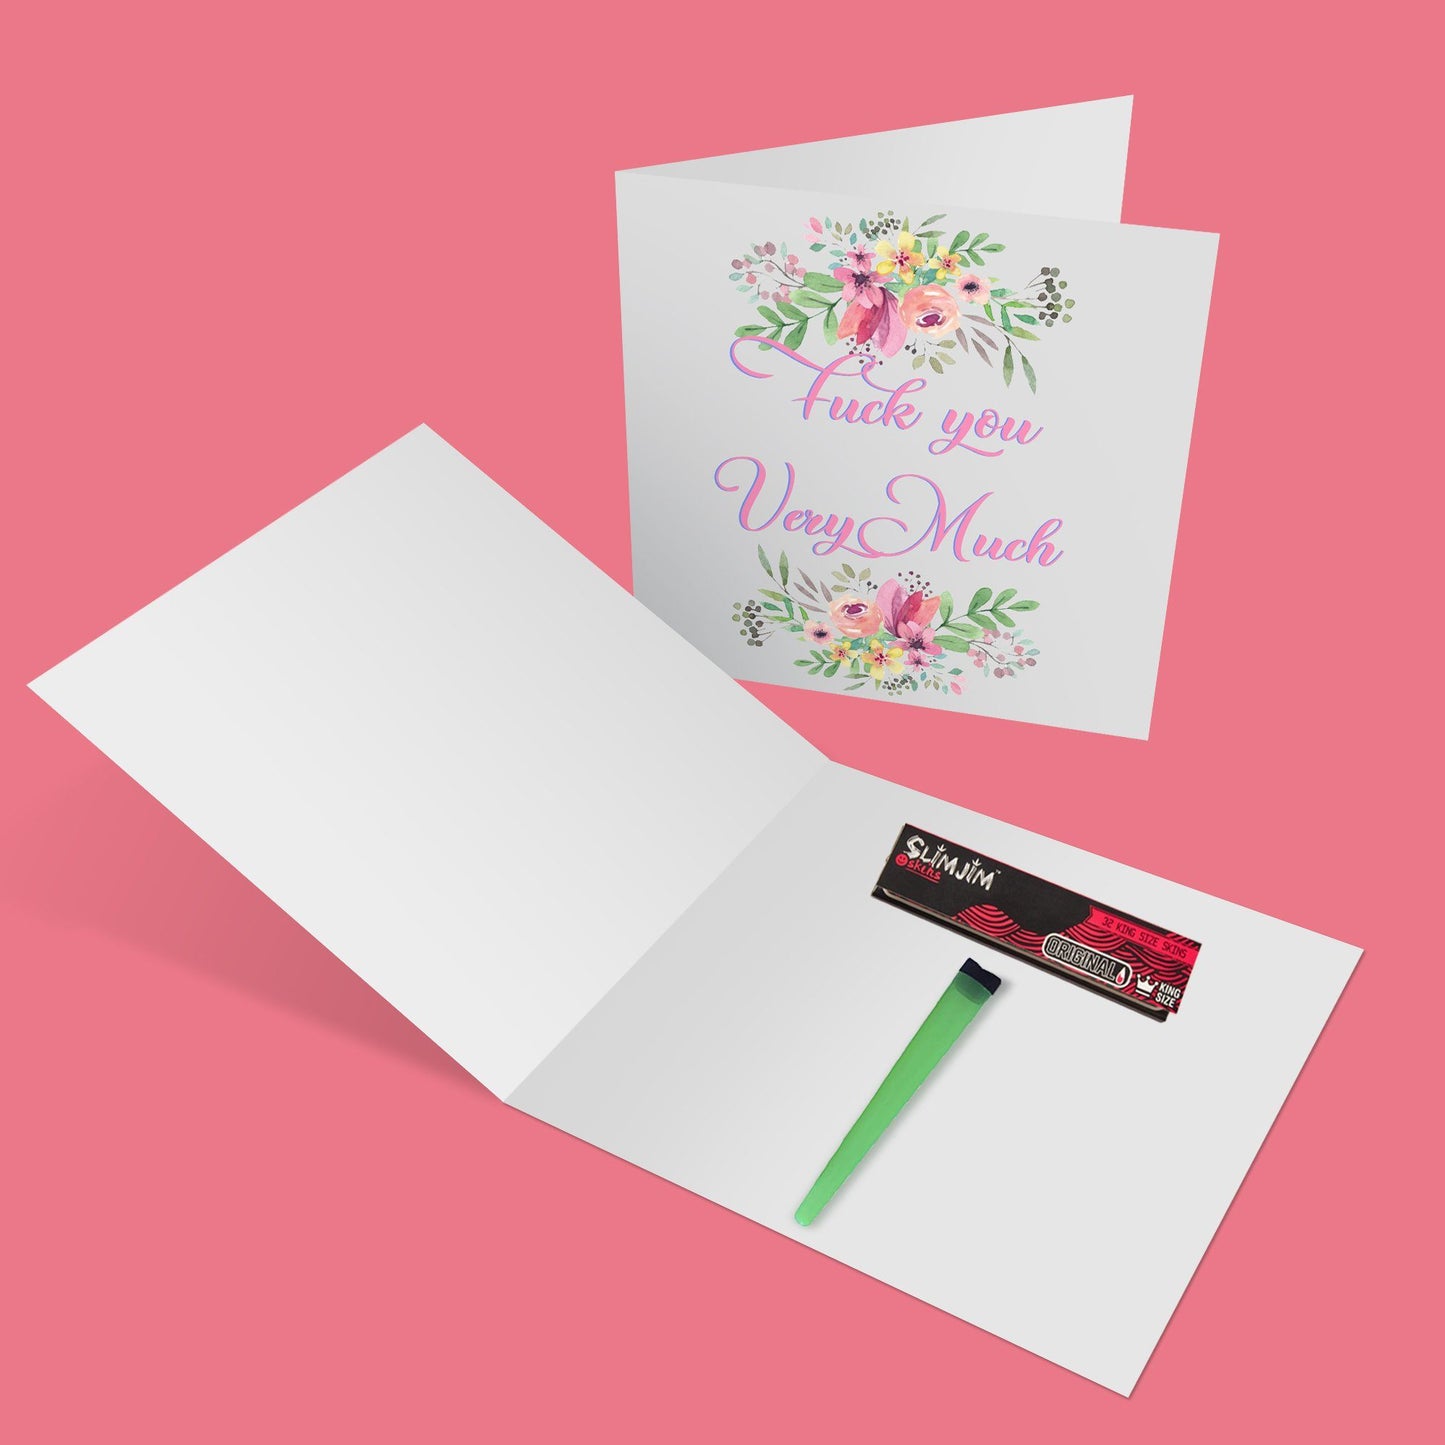 Hi Card - Fuck You Very Much Greeting Card Slimjim Skins